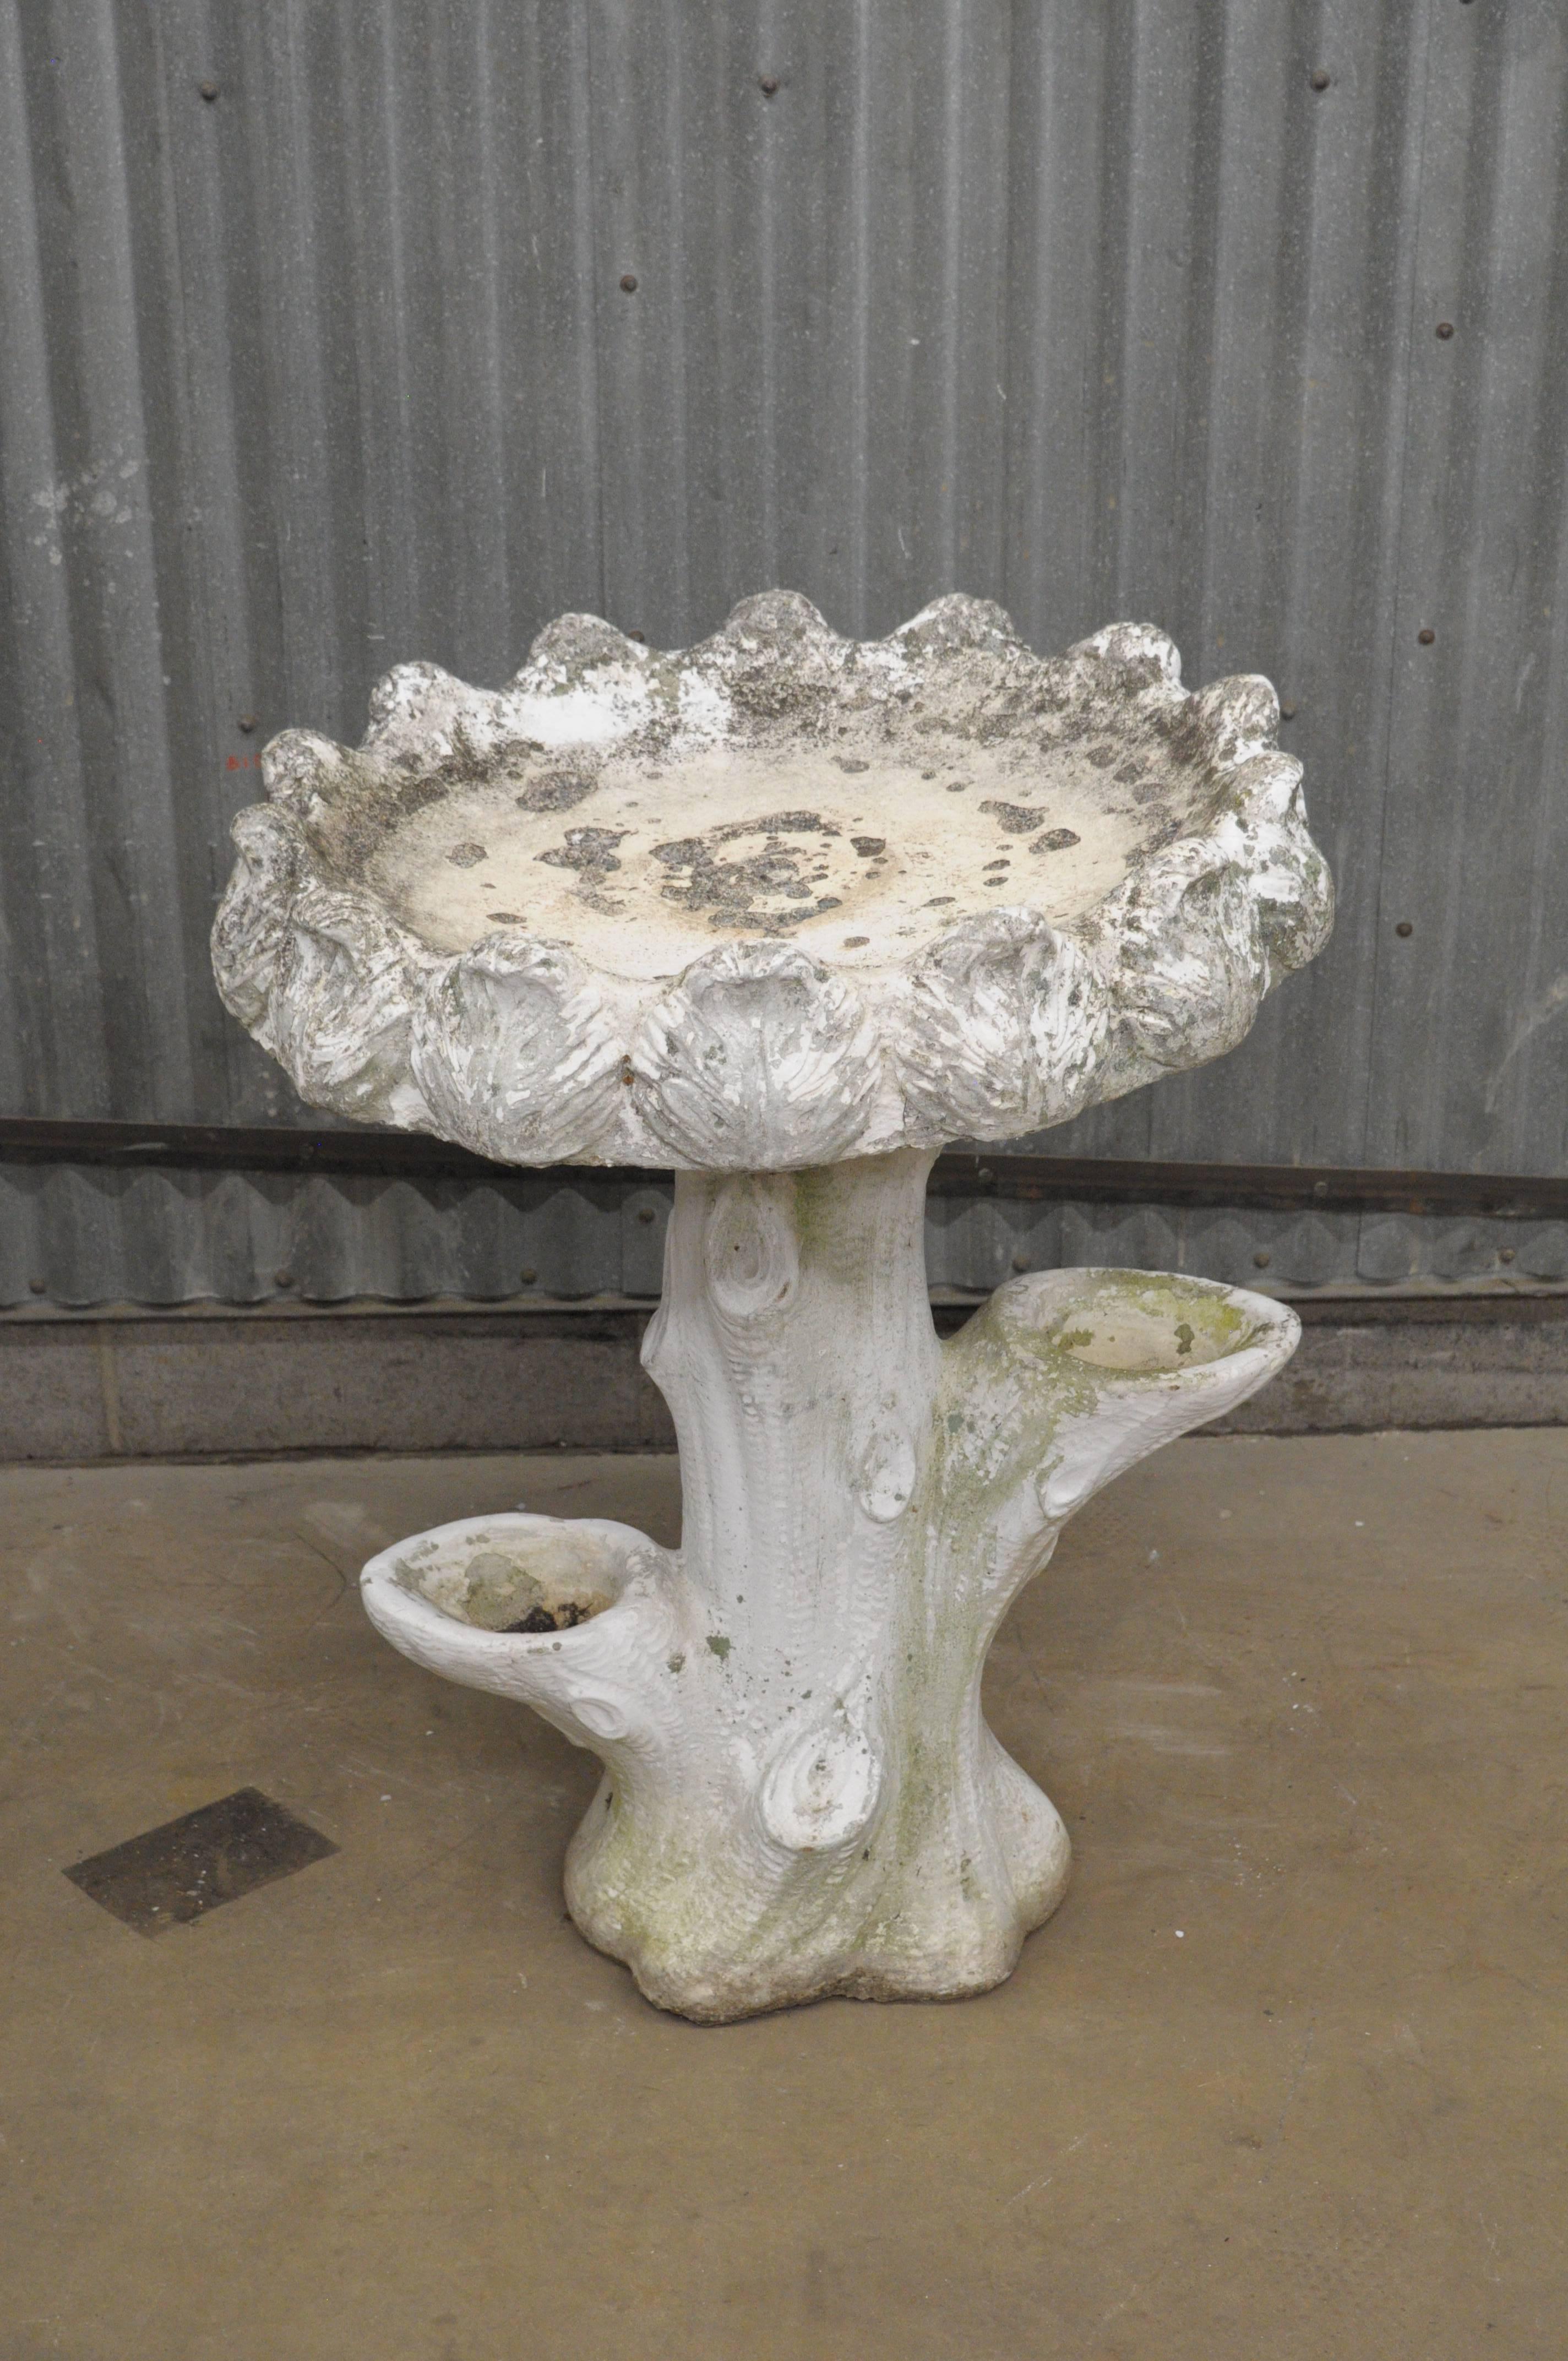 Antique faux bois French style cast cement concrete two part garden bird bath. Item features an ornate basin with fancy leafy border and faux bois tree branch form pedestal base. Bird bath has achieved a very nice aged weathered patina over the